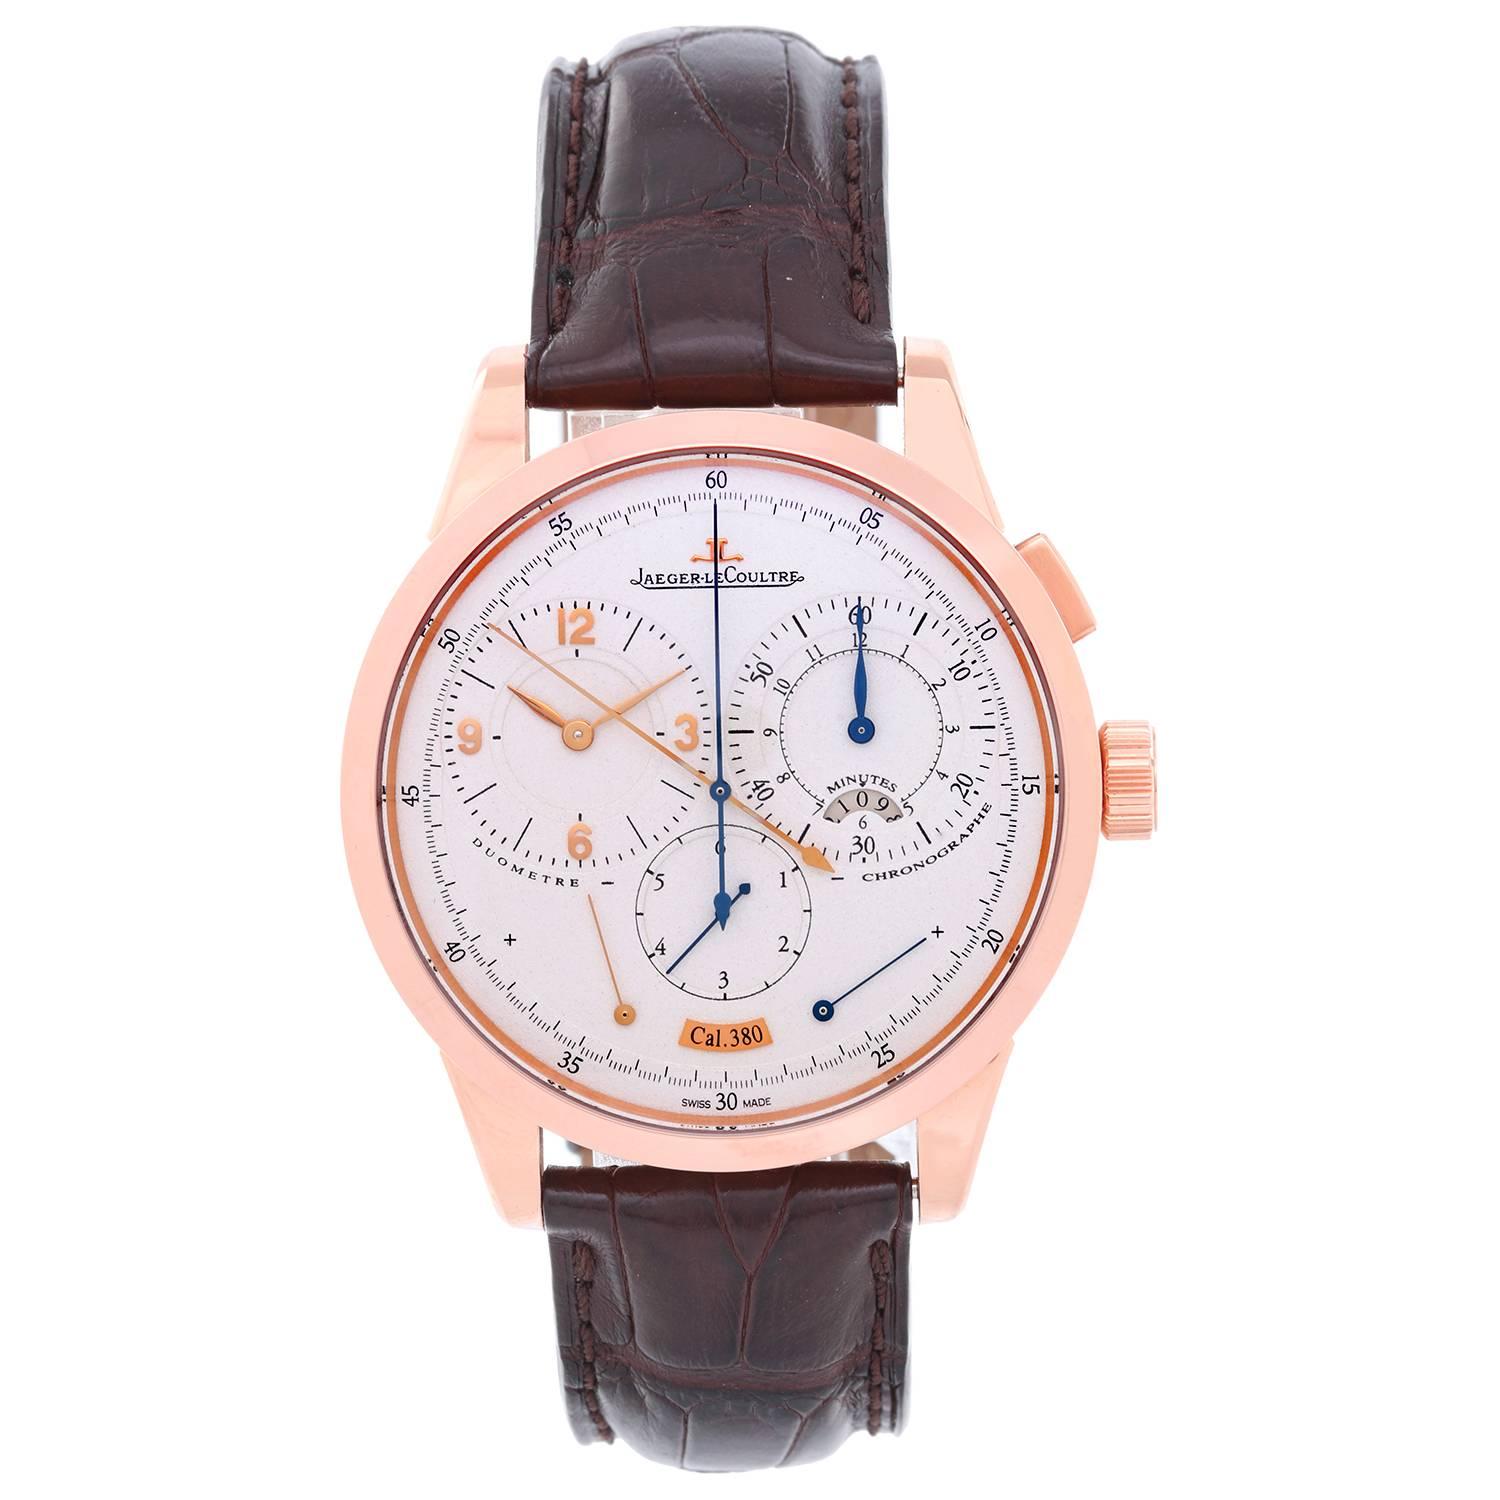 Jaeger - LeCoultre Duometre Chronograph Calibre Men's Watch 380A -  Manual winding. 18K Rose gold ( 42 mm ). Silvered dial with Rose Gold Arabic numerals. Black alligator strap with 18K Rose Gold Jaeger-LeCoultre deployant clasp. Pre-owned with